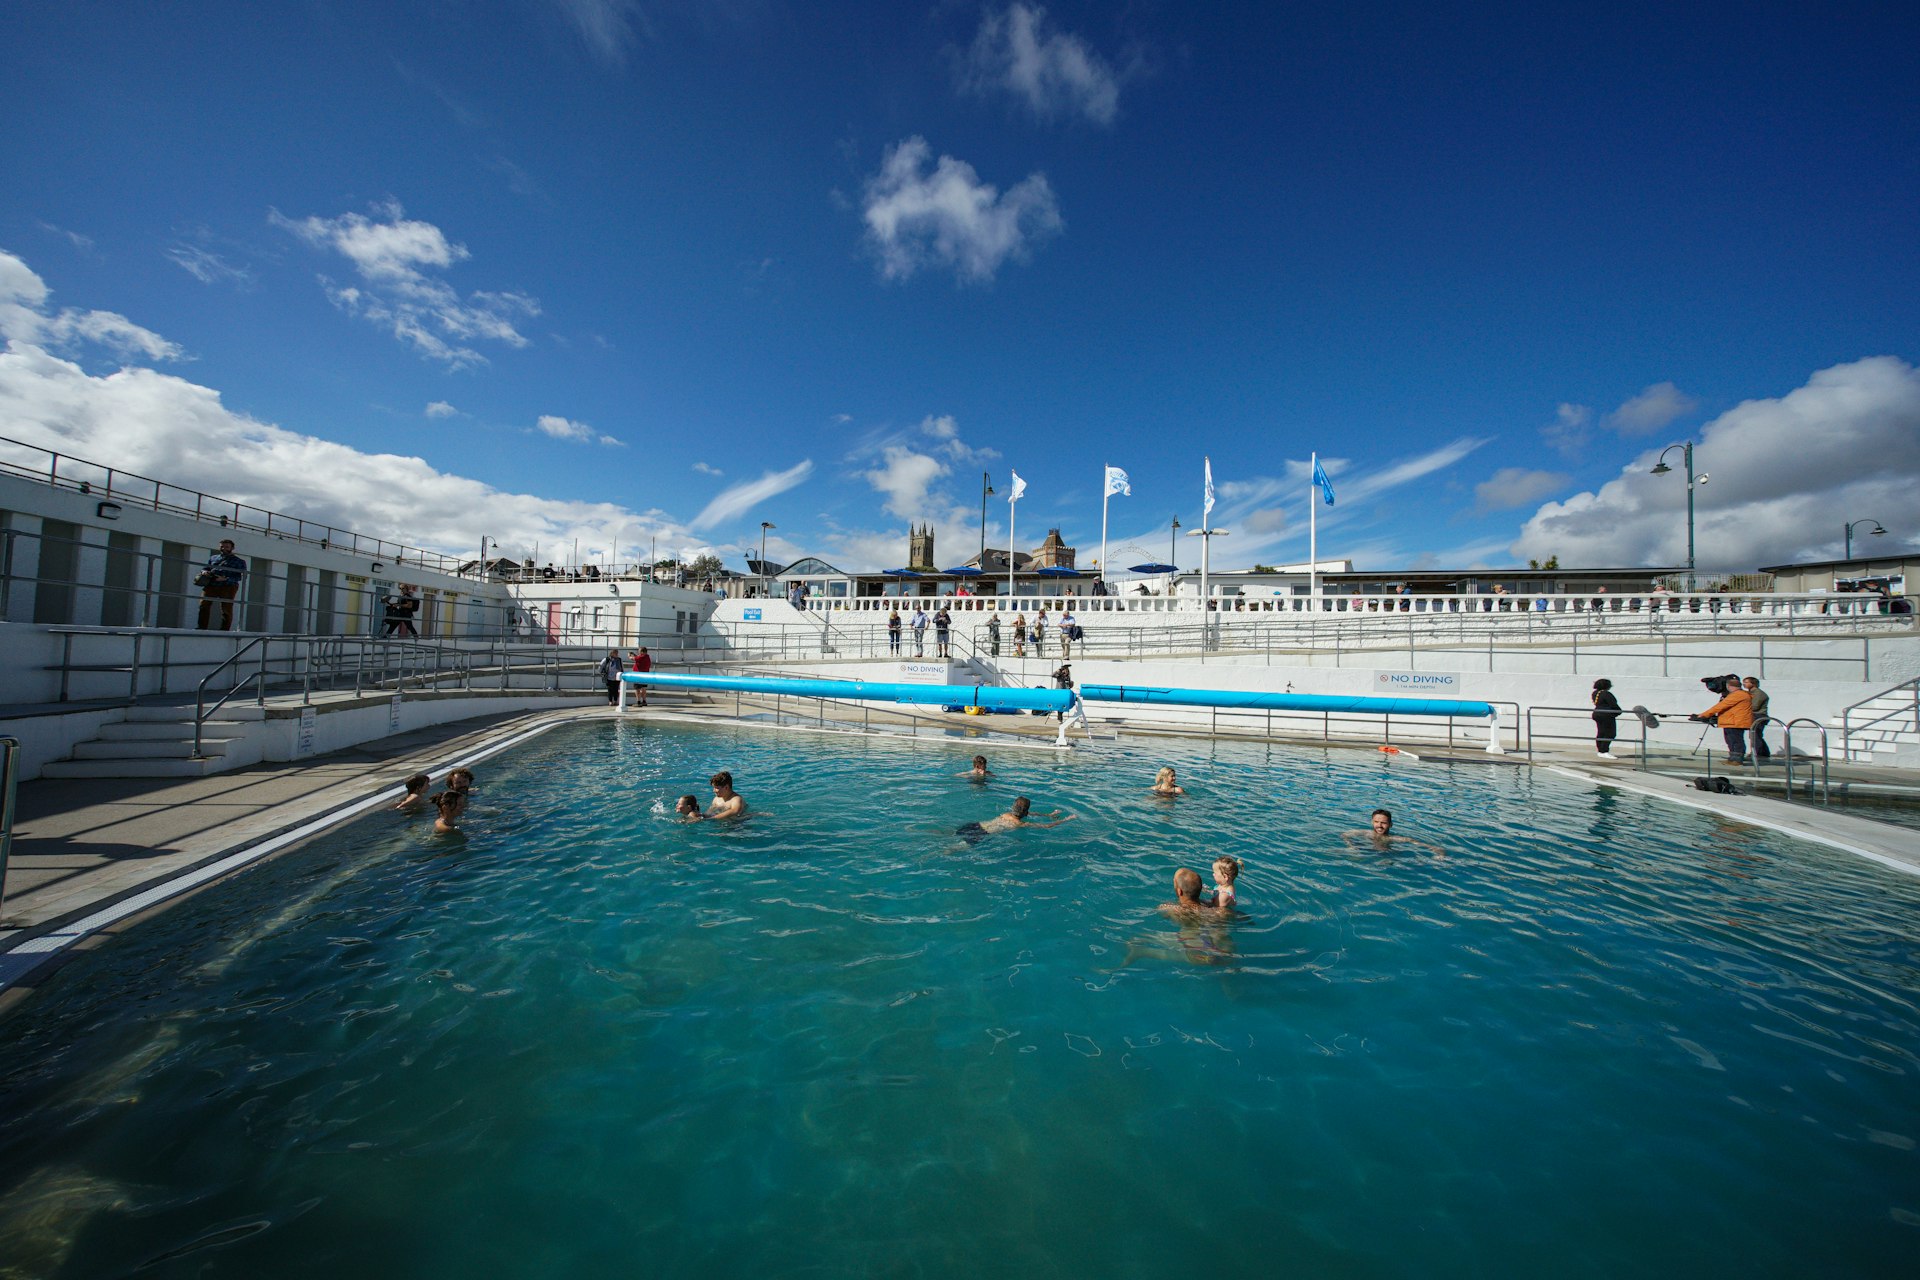 The iconic Penzance open-air Lido with its geothermal pool